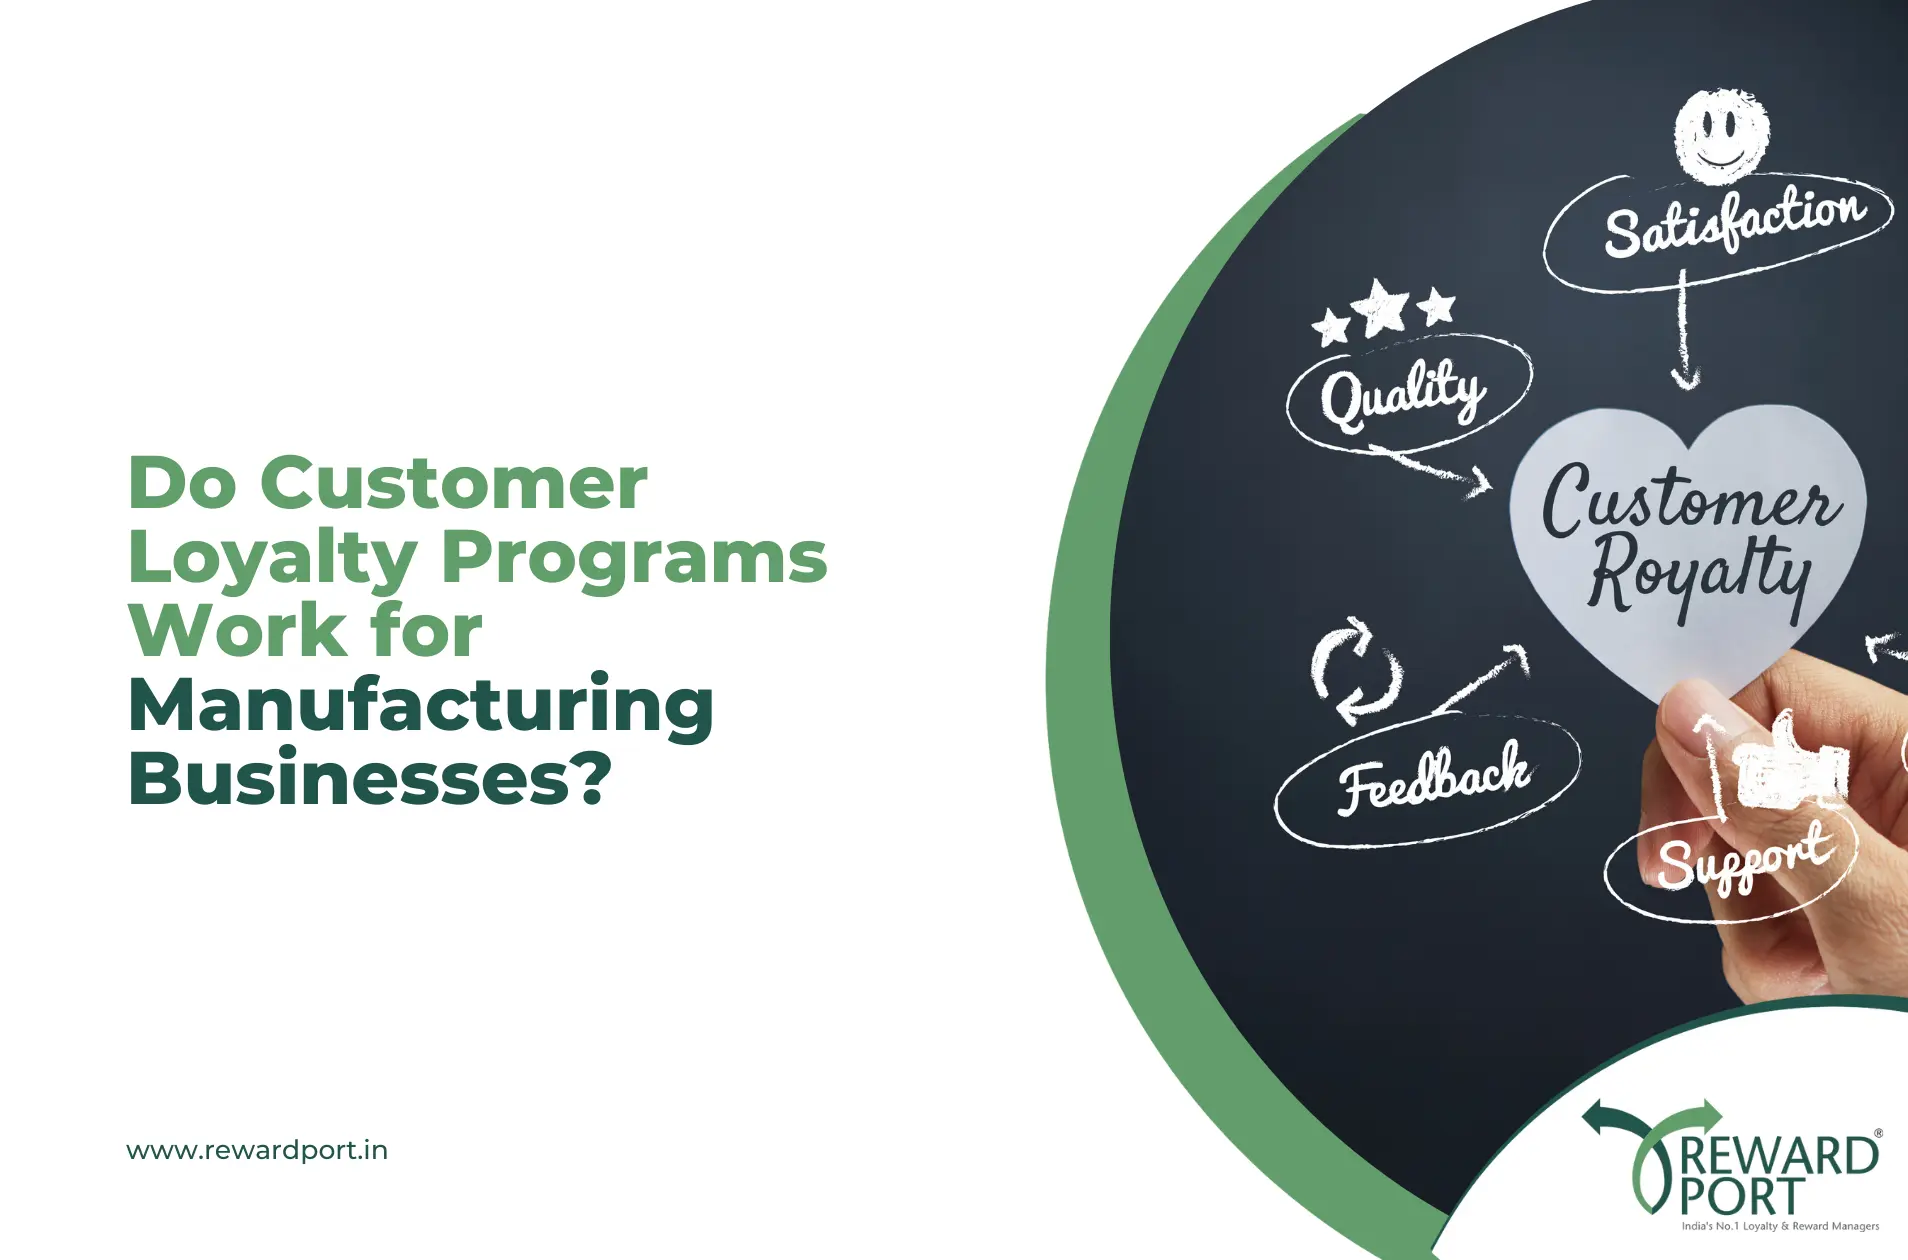 Do Customer Loyalty Programs Work for Manufacturing Businesses